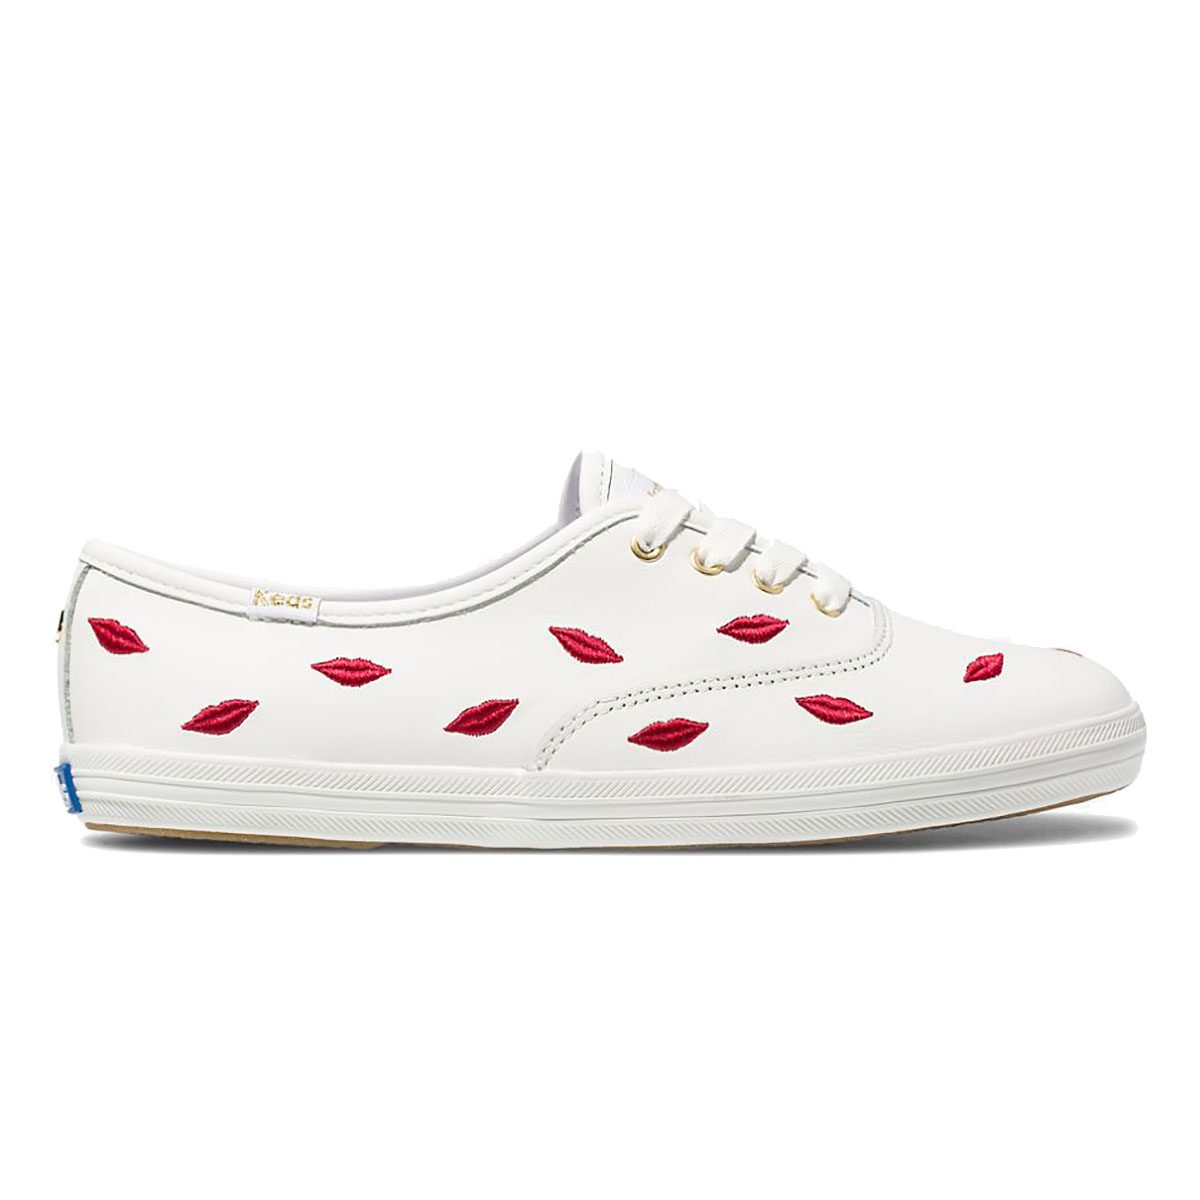 Total 65+ imagen kate spade white sneakers - Abzlocal.mx